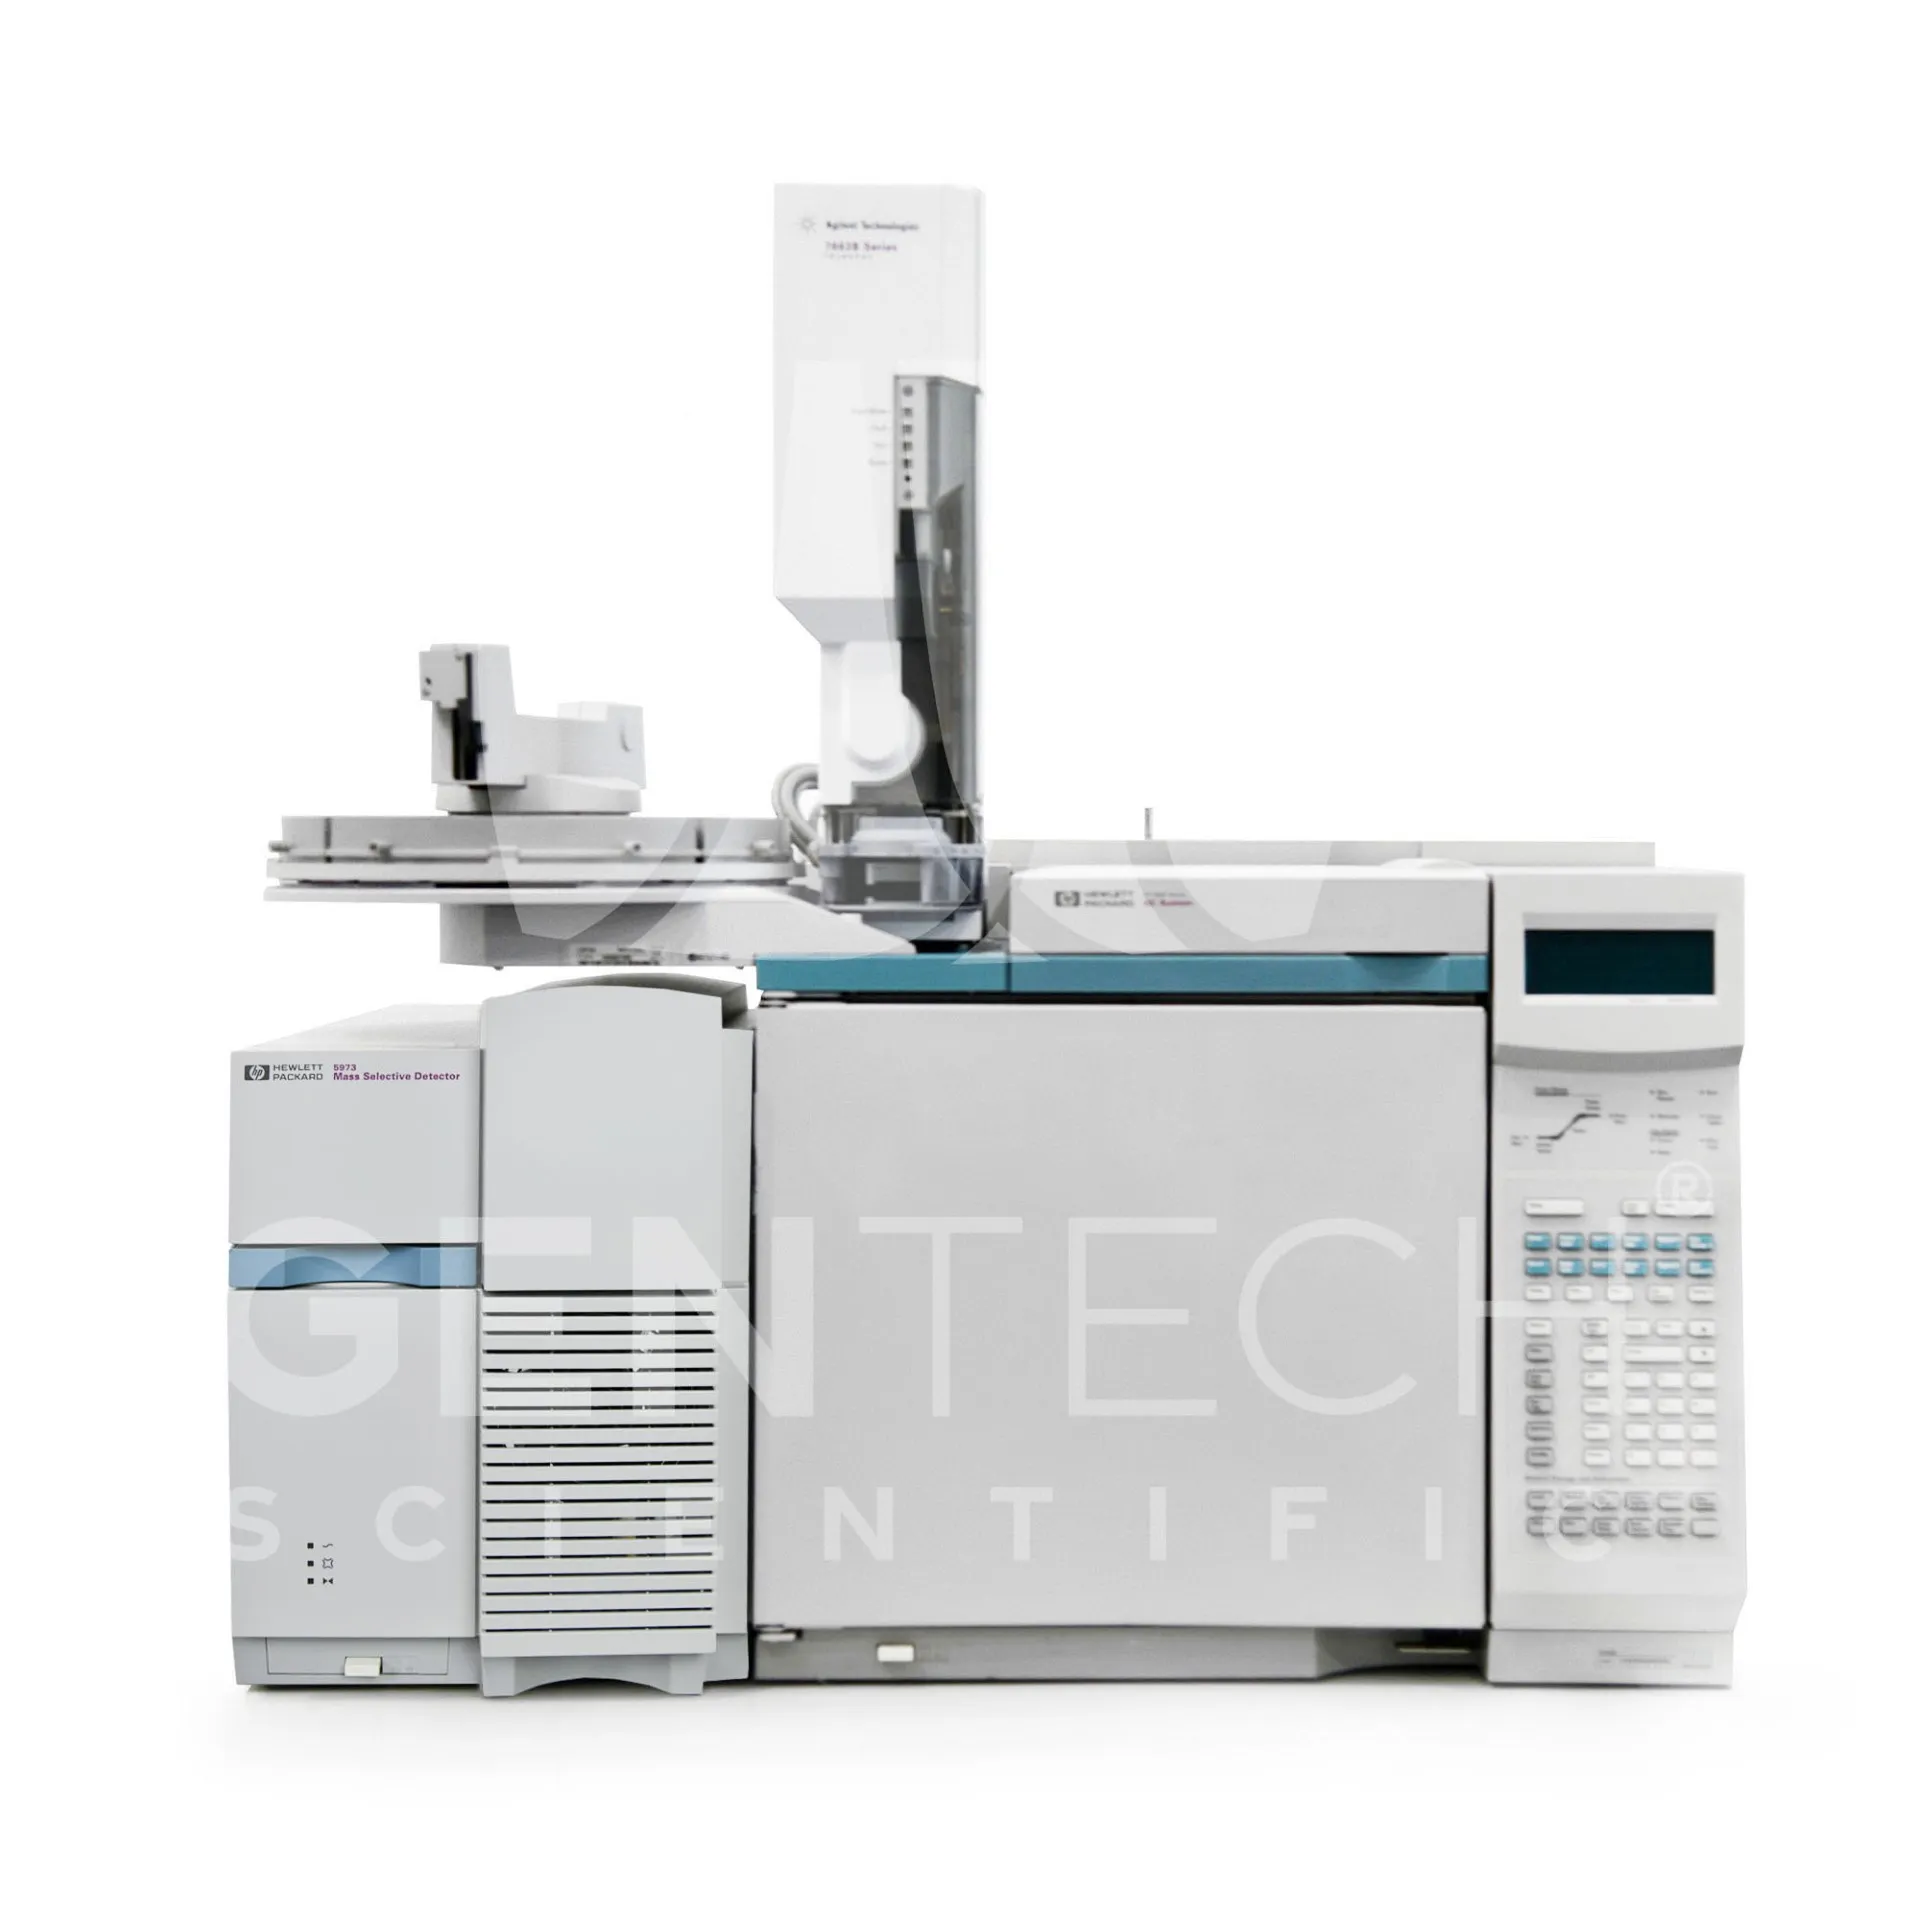 Agilent 6890 GC with 5973A MSD & 7683 AS